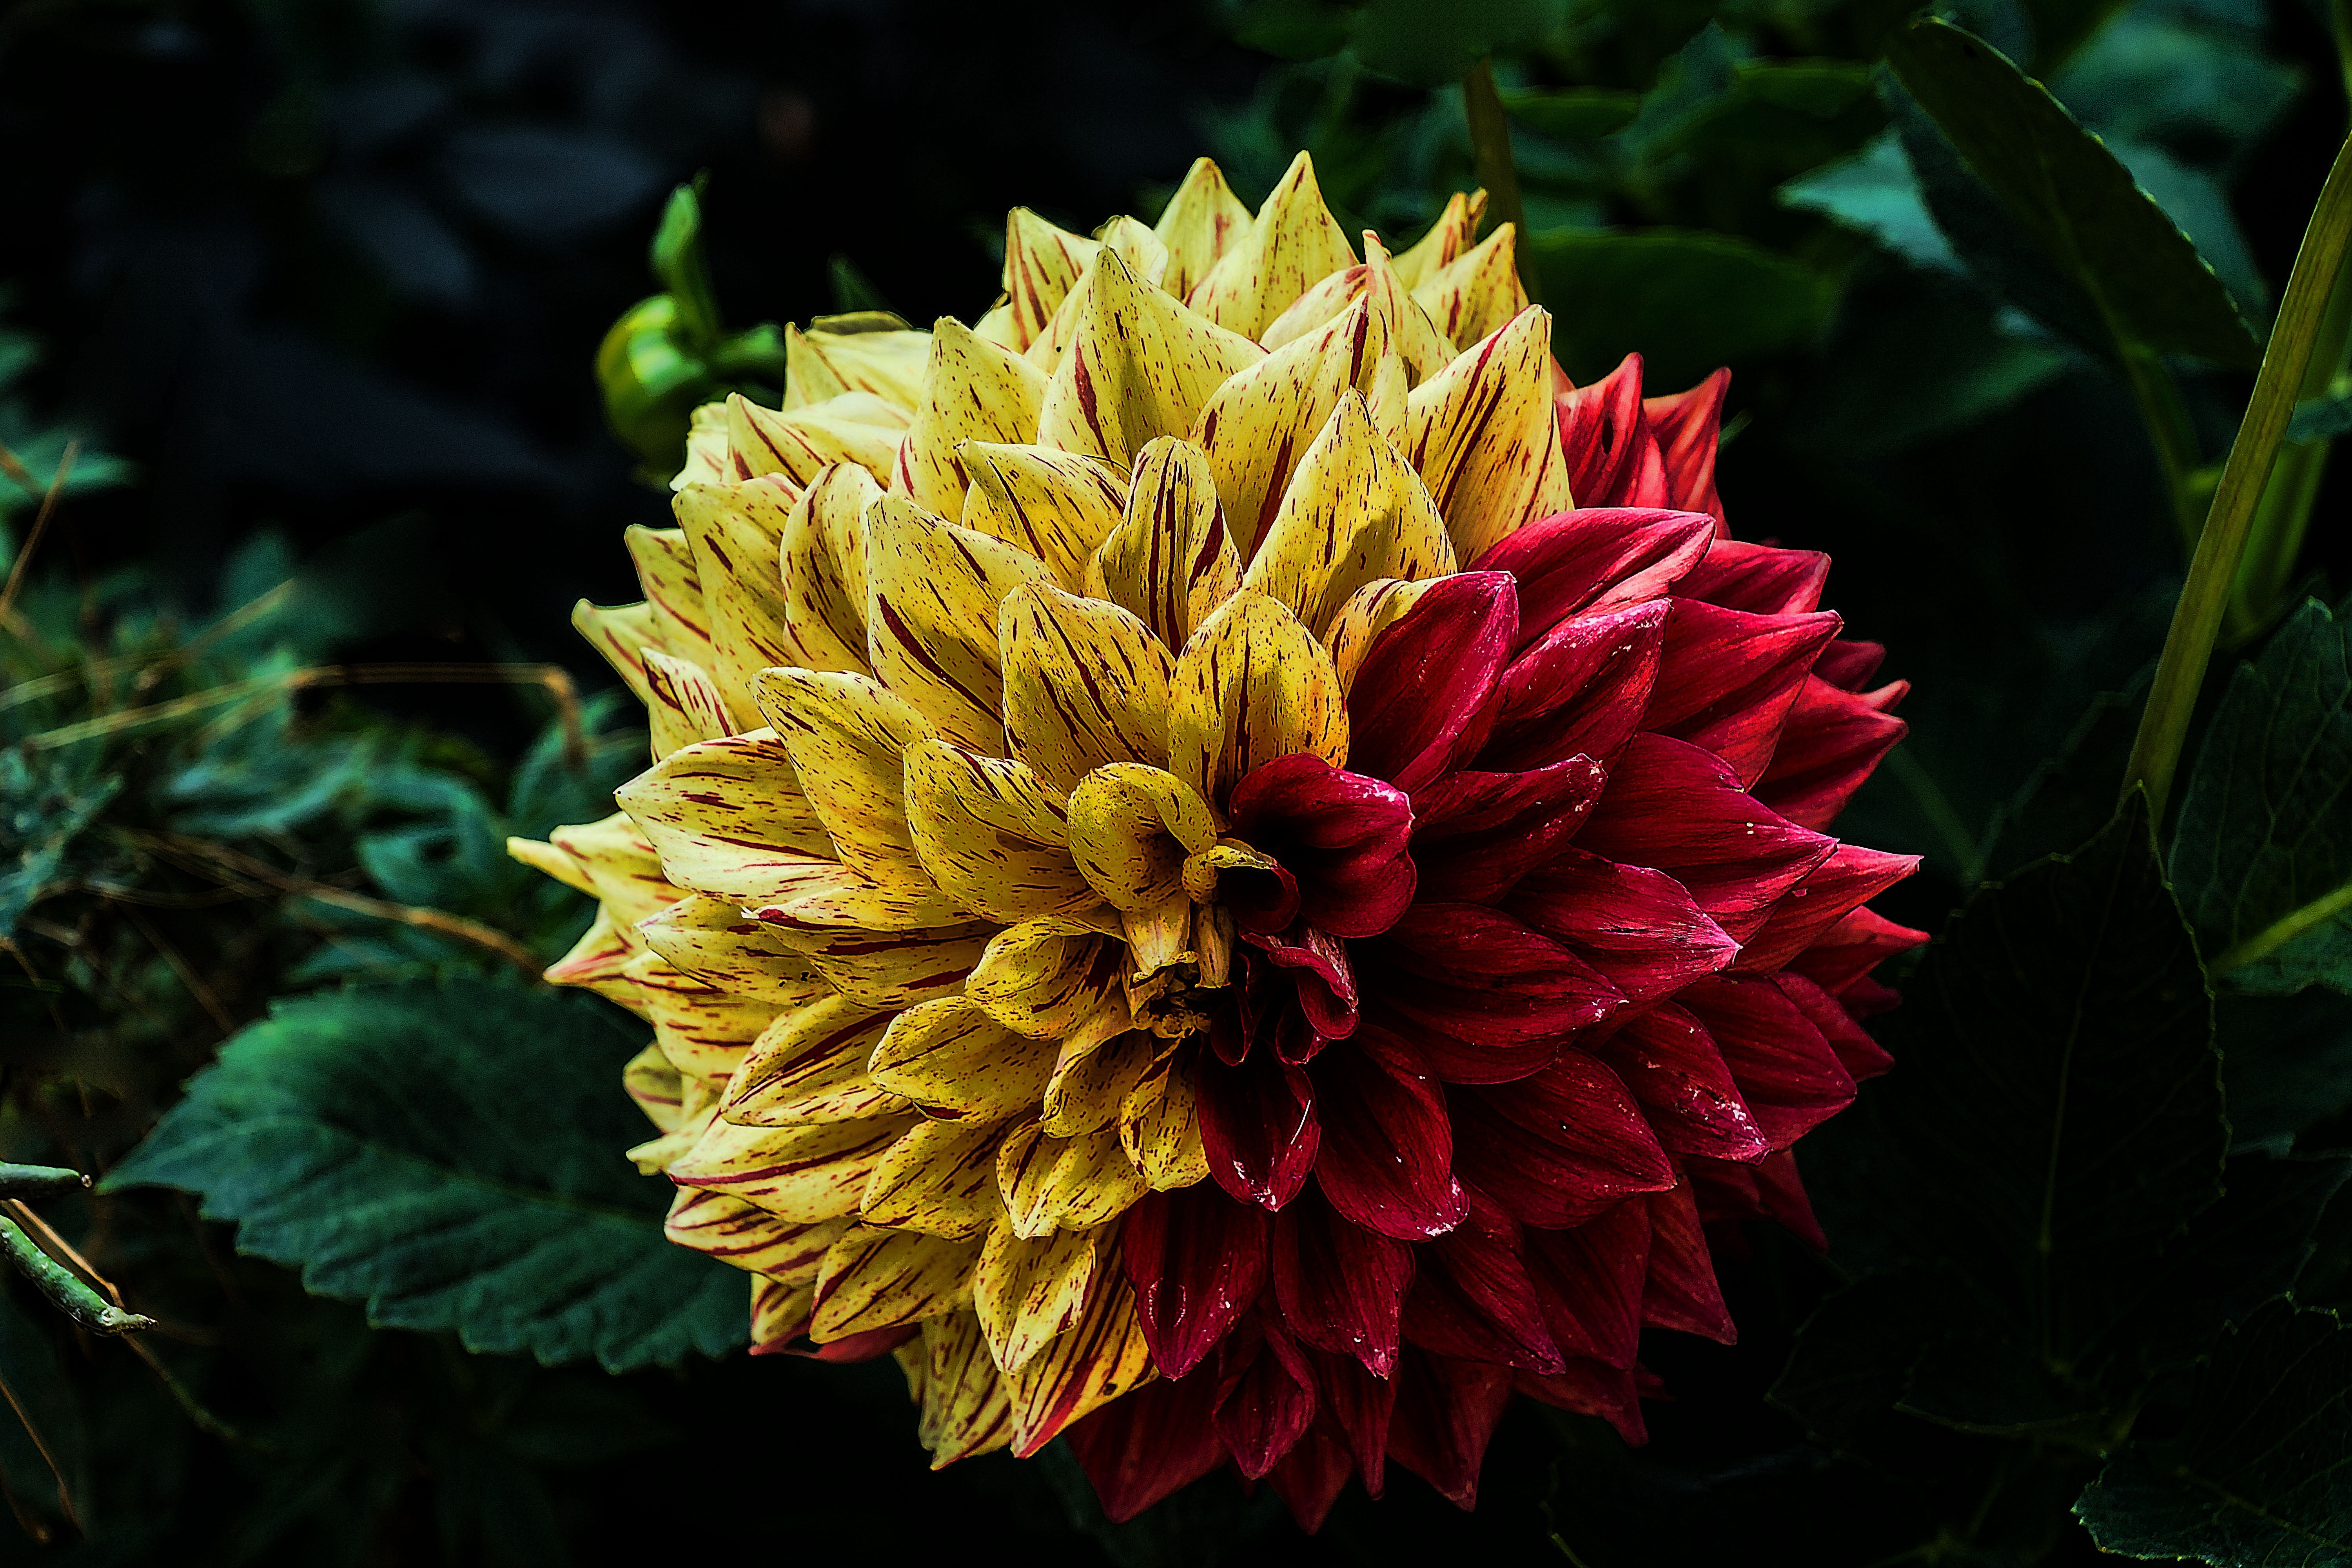 yellow-and-red petaled flower